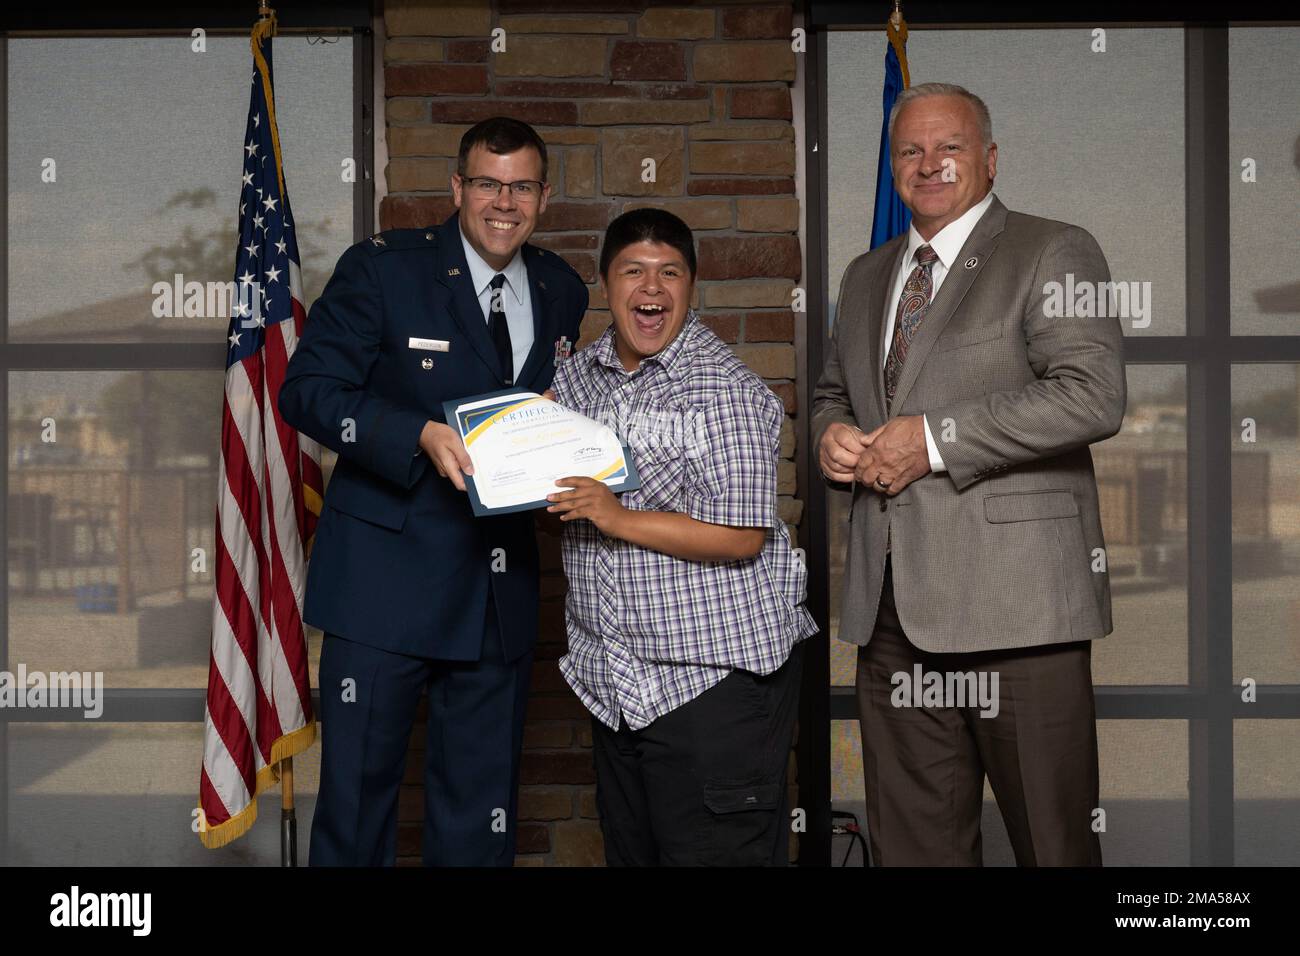 Seth Kernohan, Project SEARCH intern, receives graduation certificate, May 24, 2022, on Holloman Air Force Base, New Mexico. Project SEARCH is a year-long internship to help intellectually disabled high school graduates develop job skills. Stock Photo